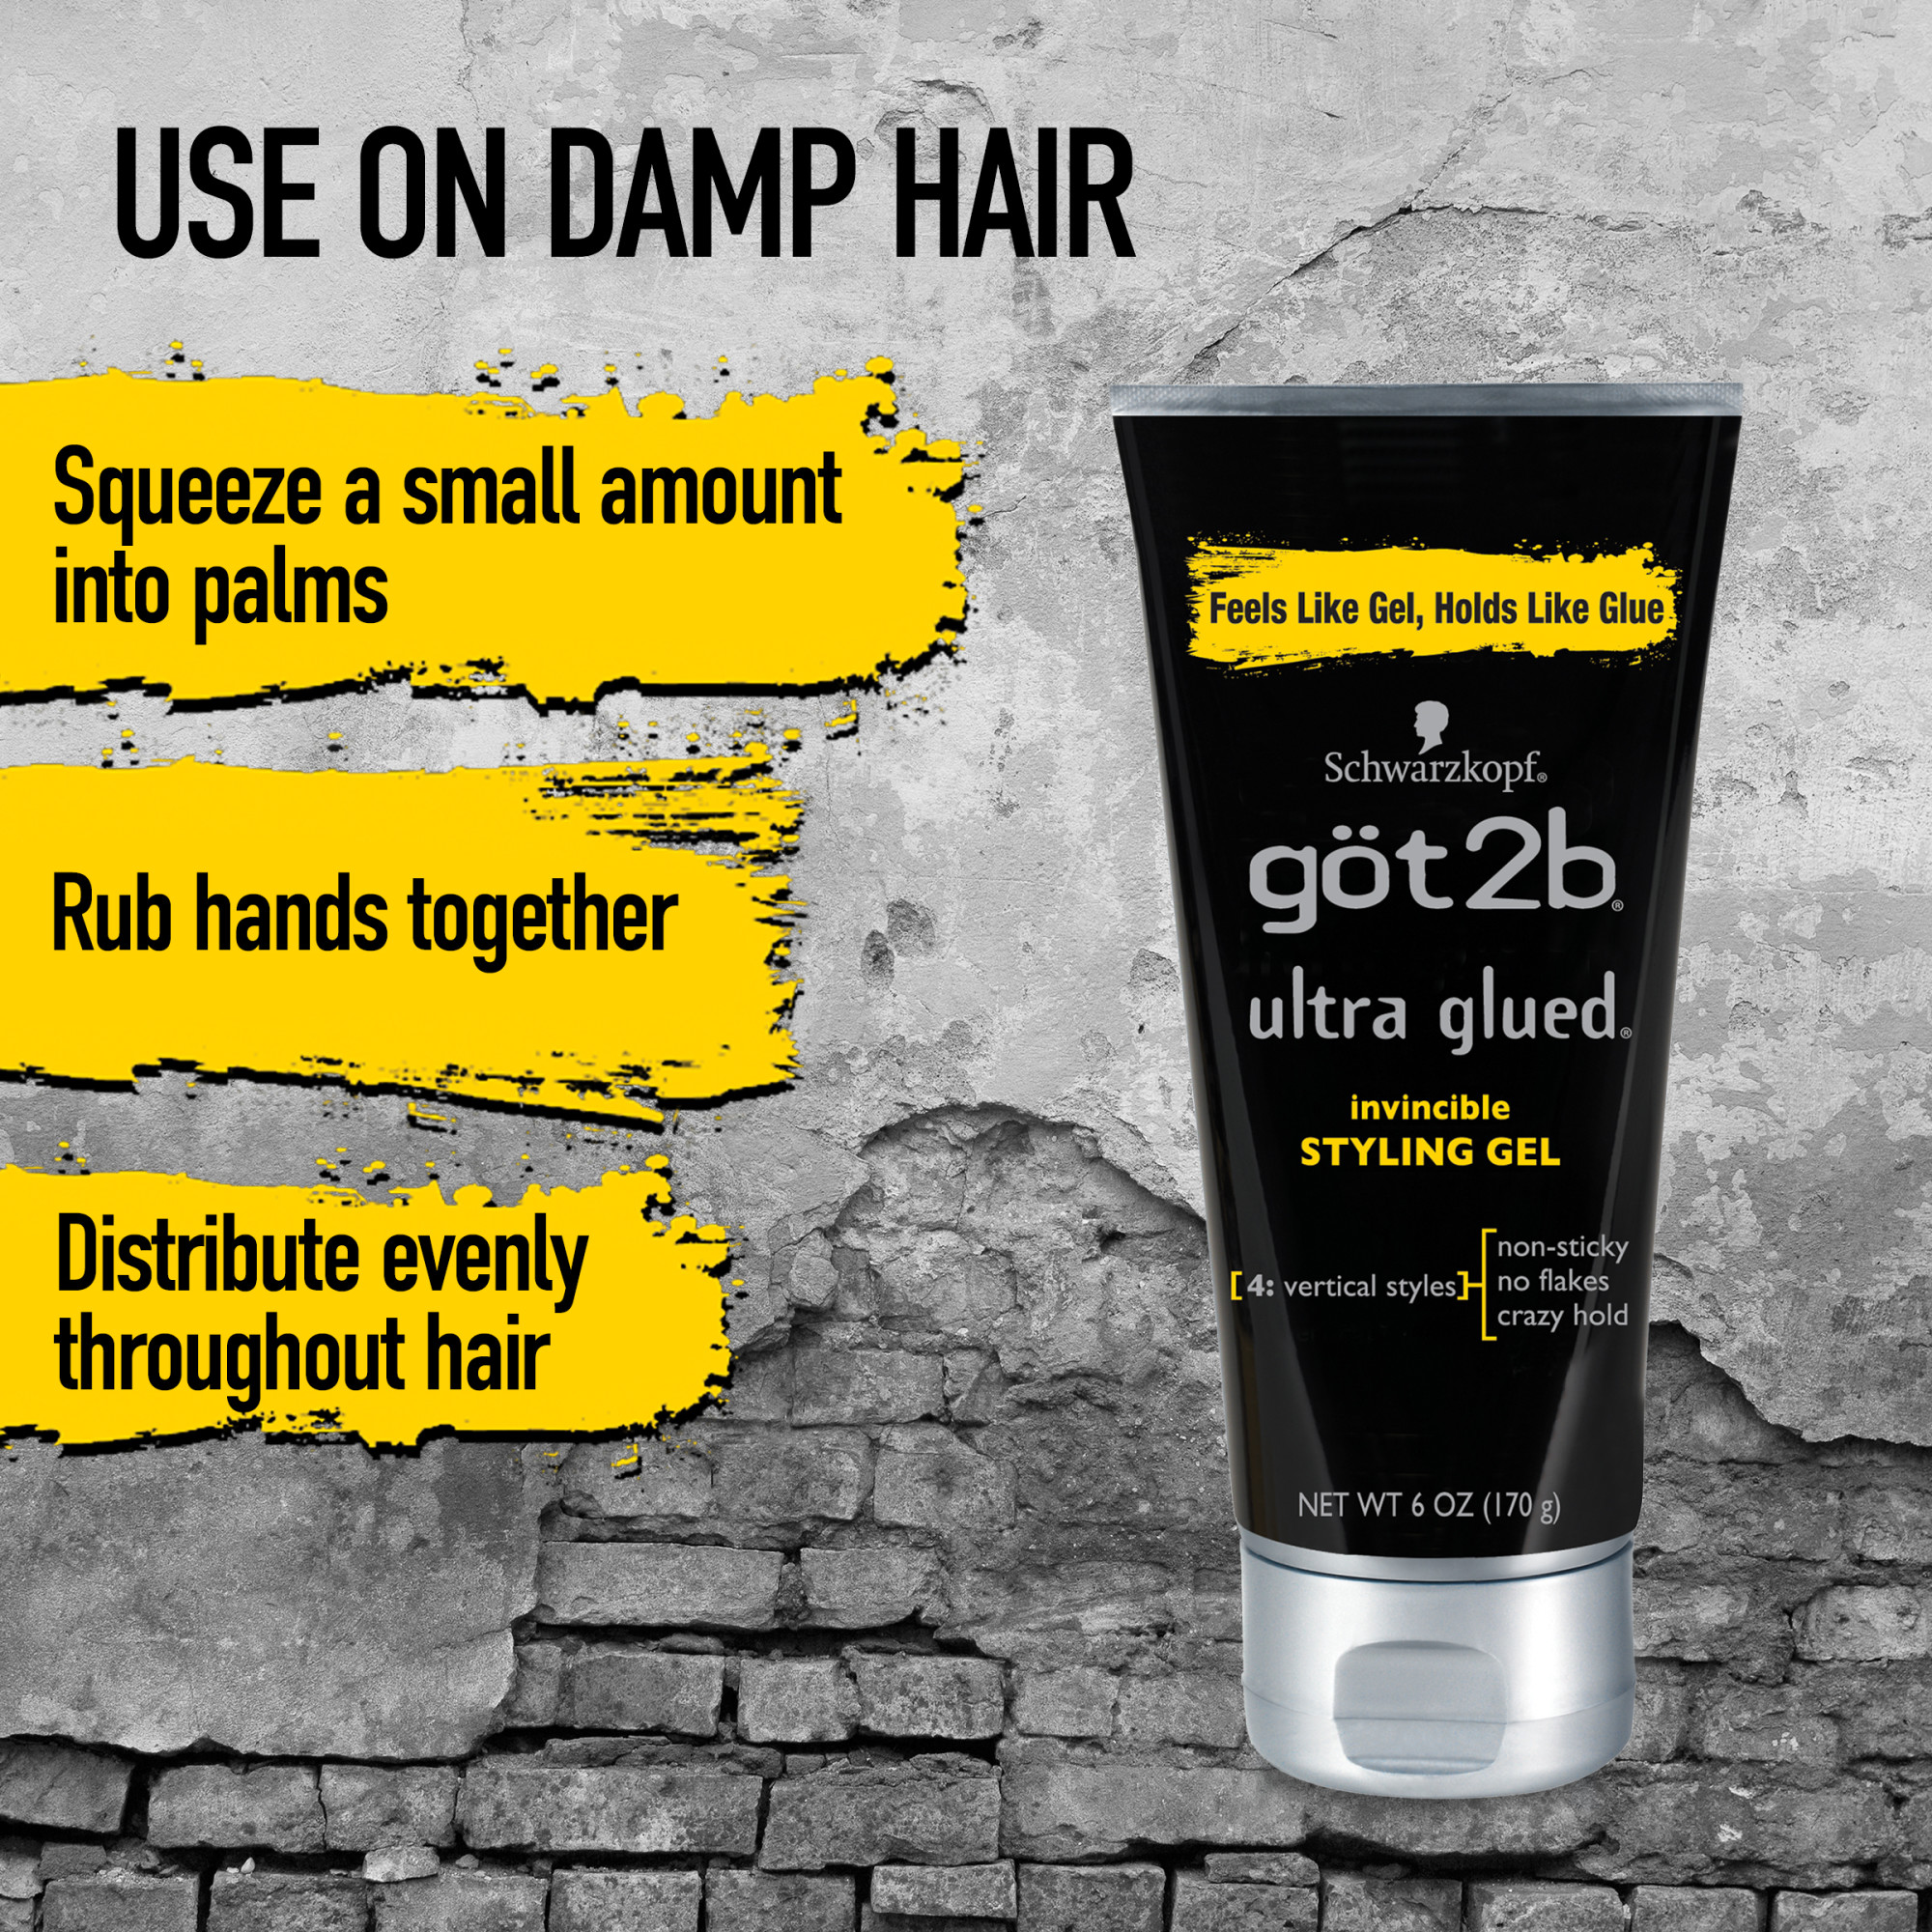 Got2b Ultra Glued Invincible Styling Hair Gel, 6 oz (Count of 3) - image 5 of 9